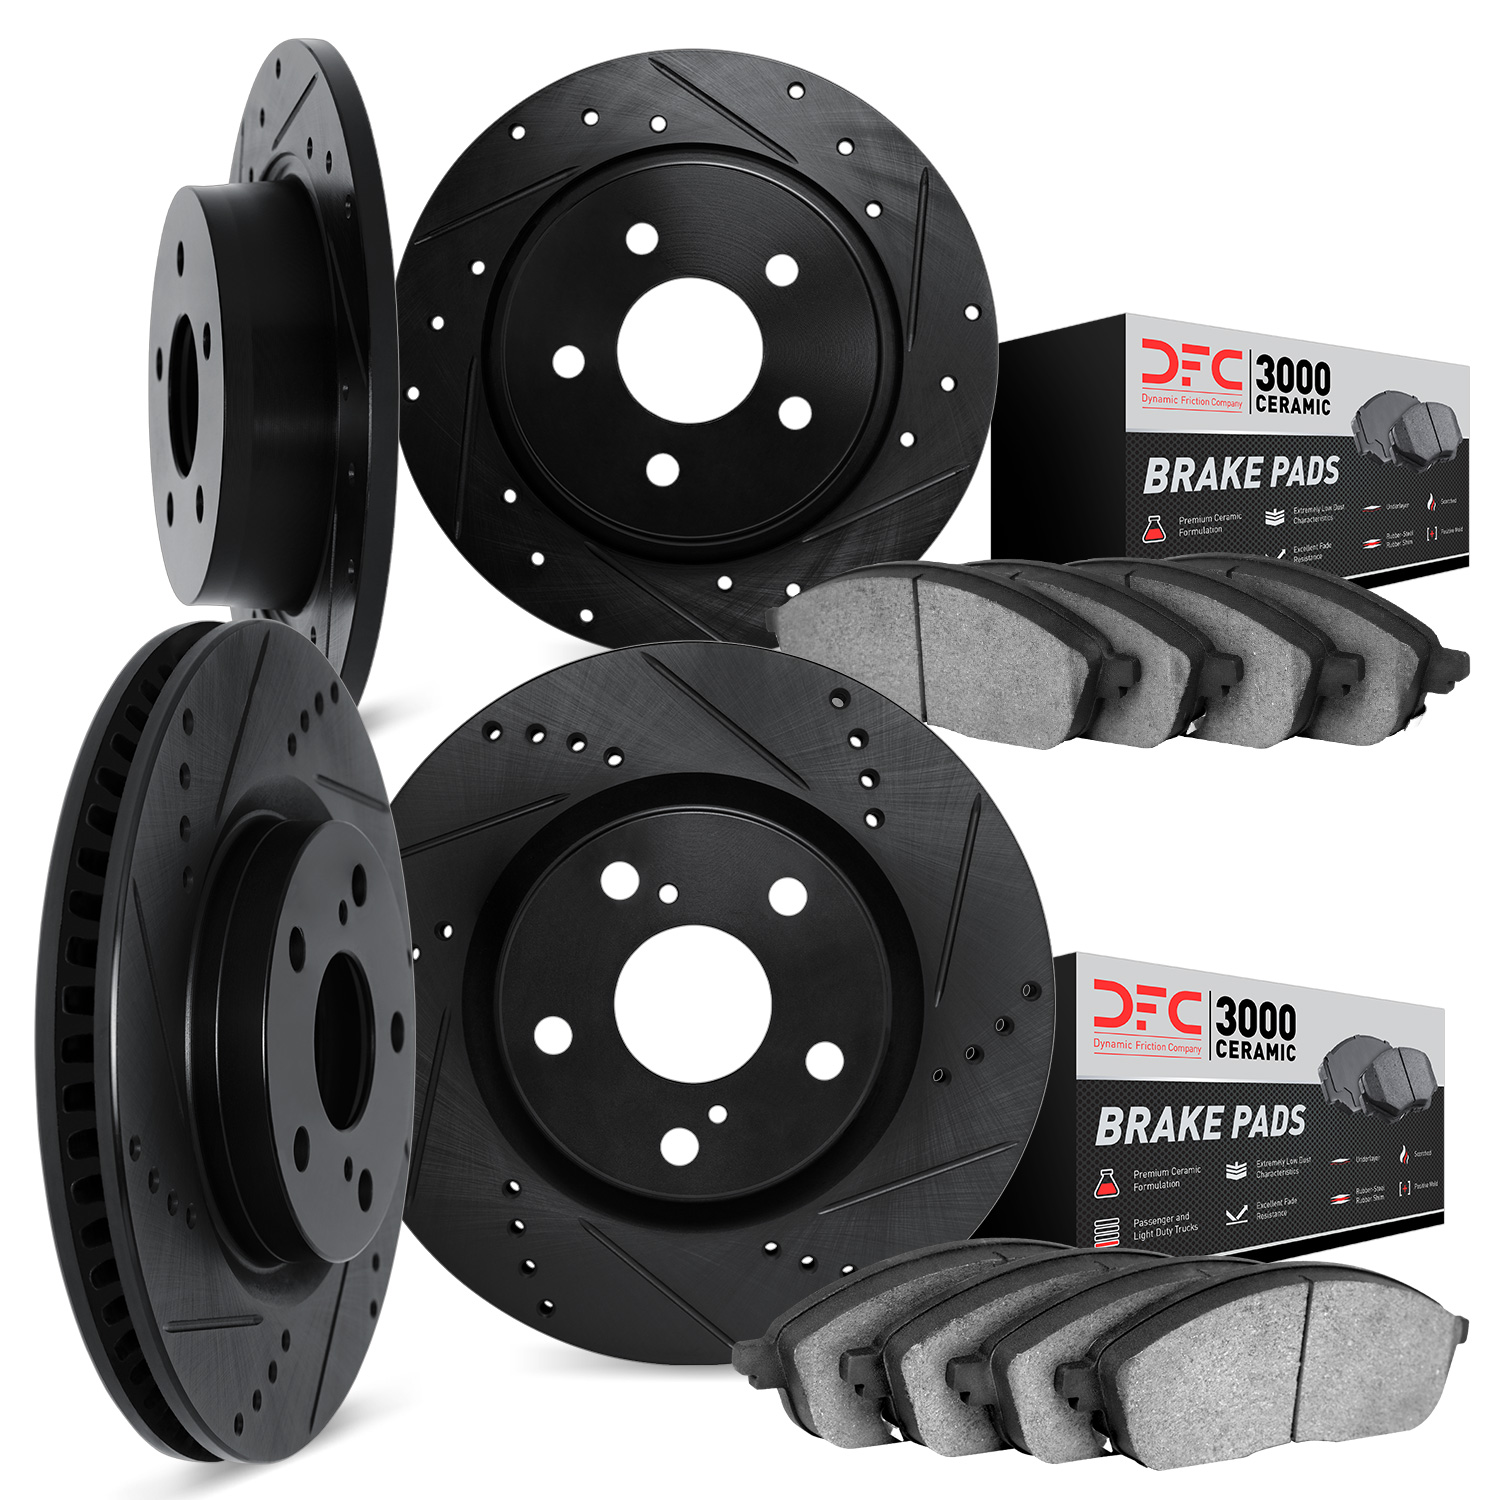 8304-59060 Drilled/Slotted Brake Rotors with 3000-Series Ceramic Brake Pads Kit [Black], 2007-2012 Acura/Honda, Position: Front